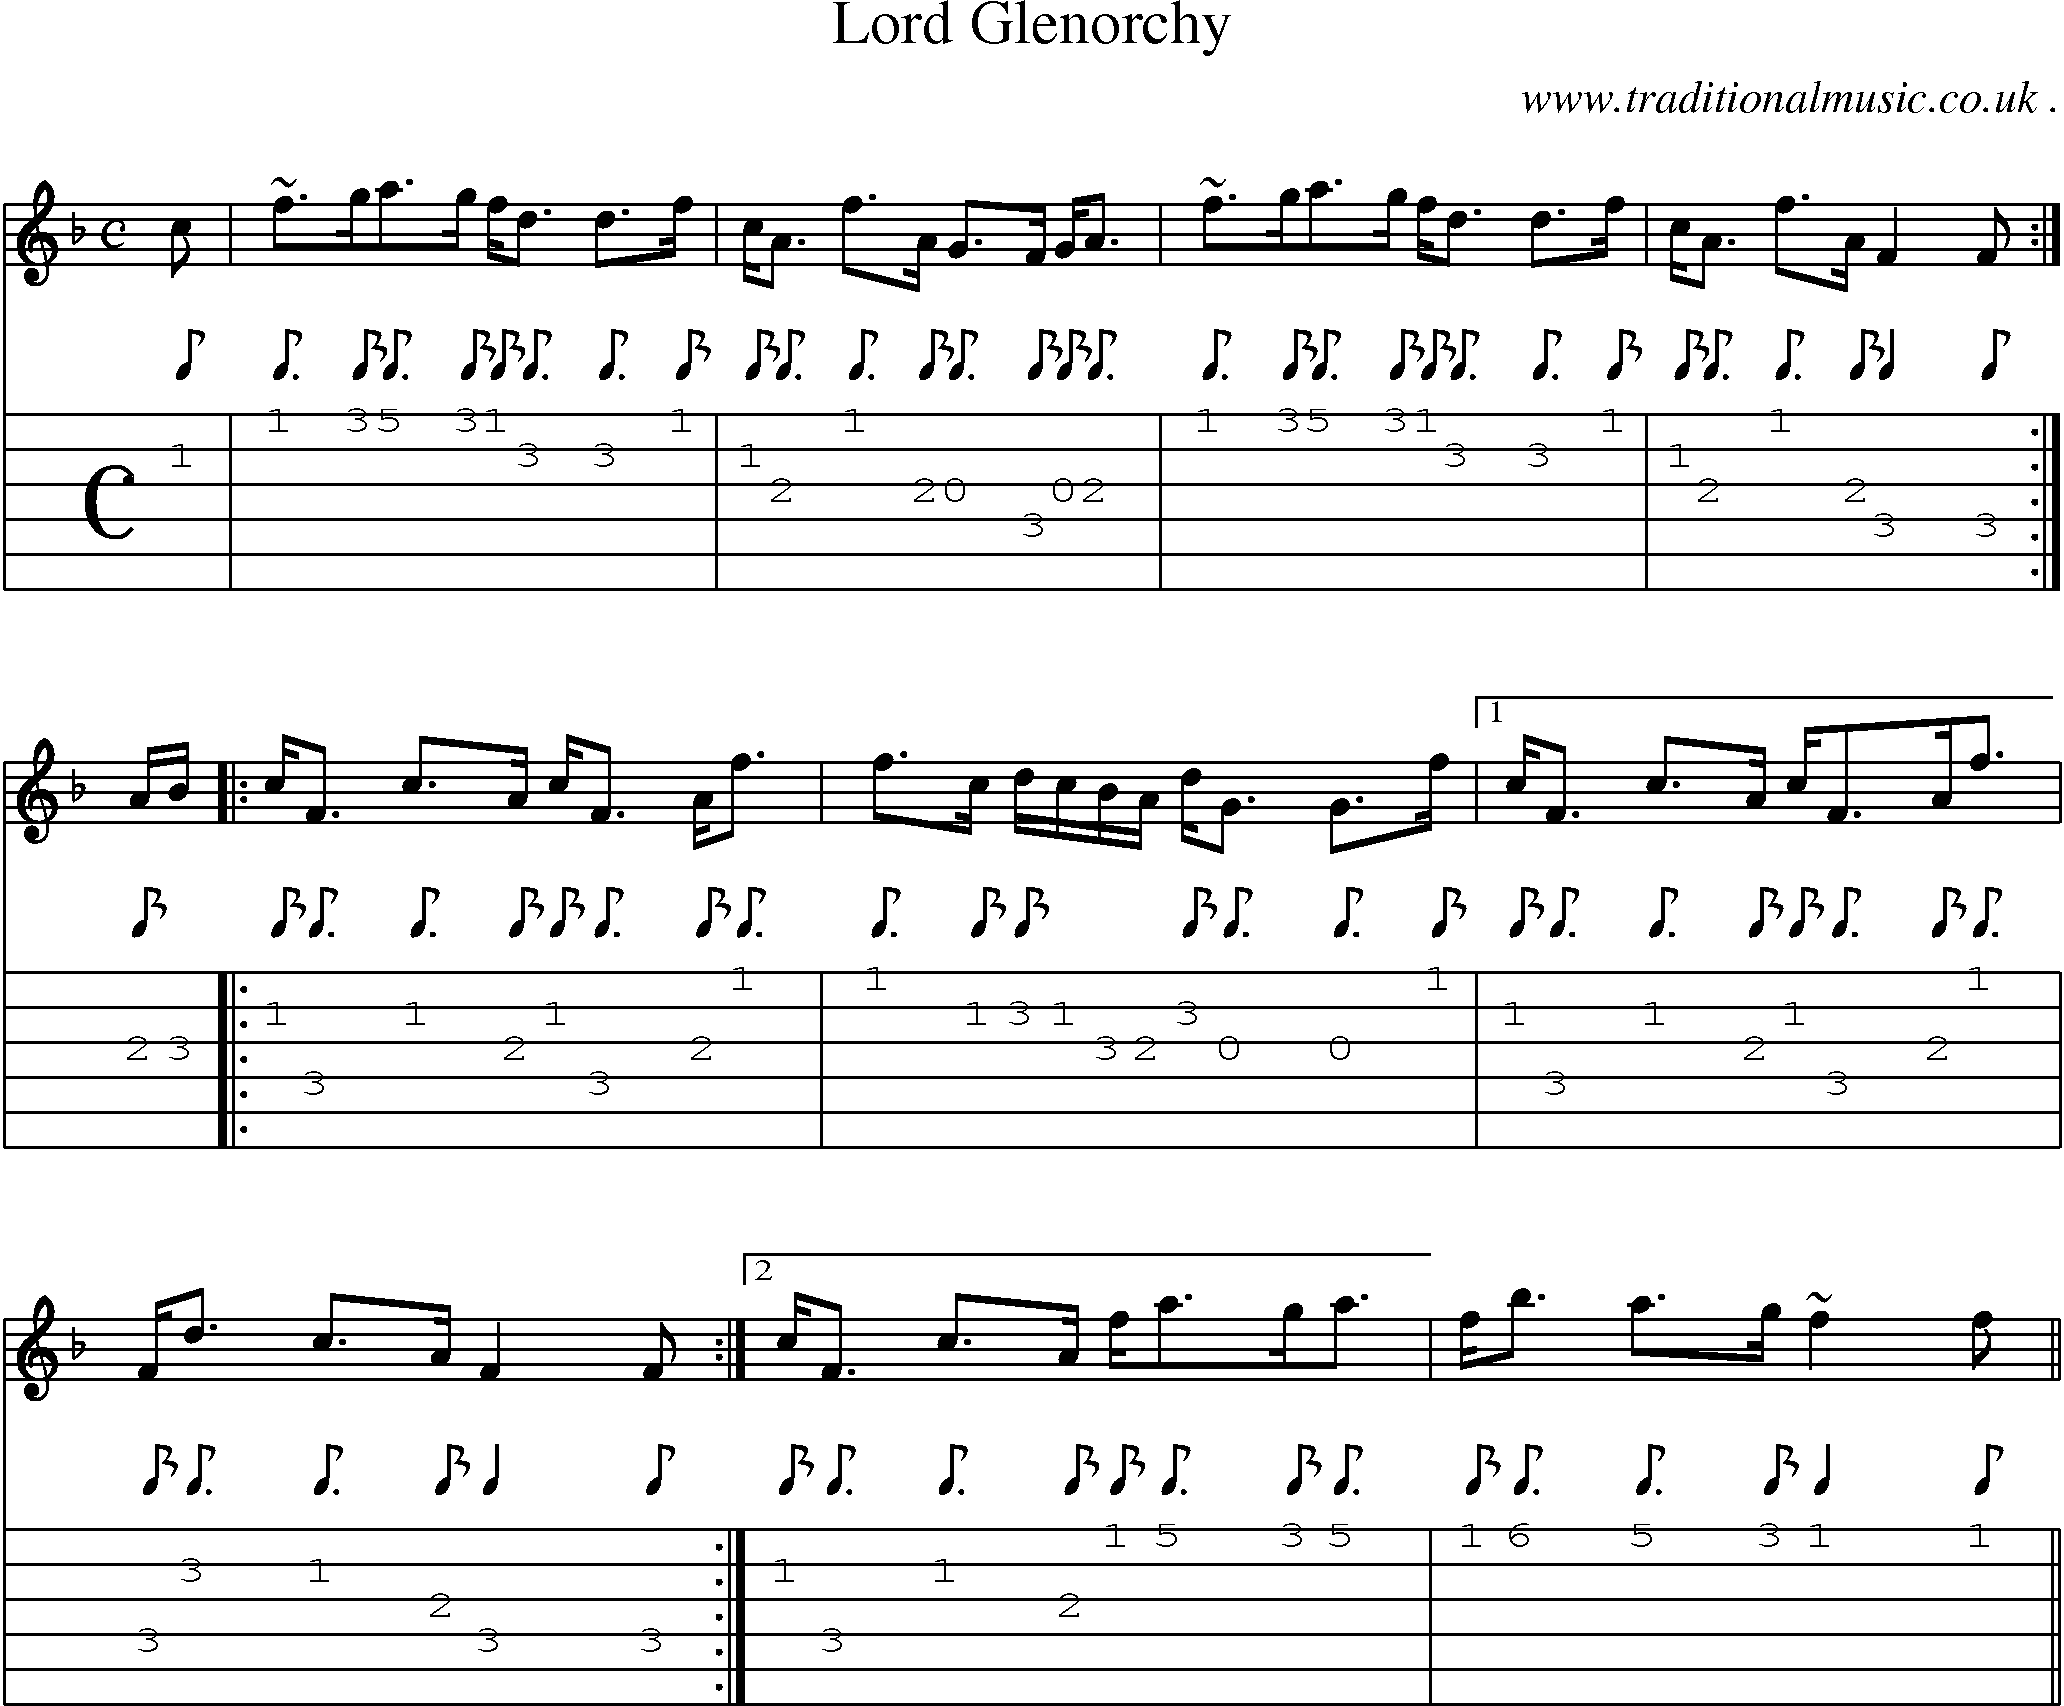 Sheet-music  score, Chords and Guitar Tabs for Lord Glenorchy